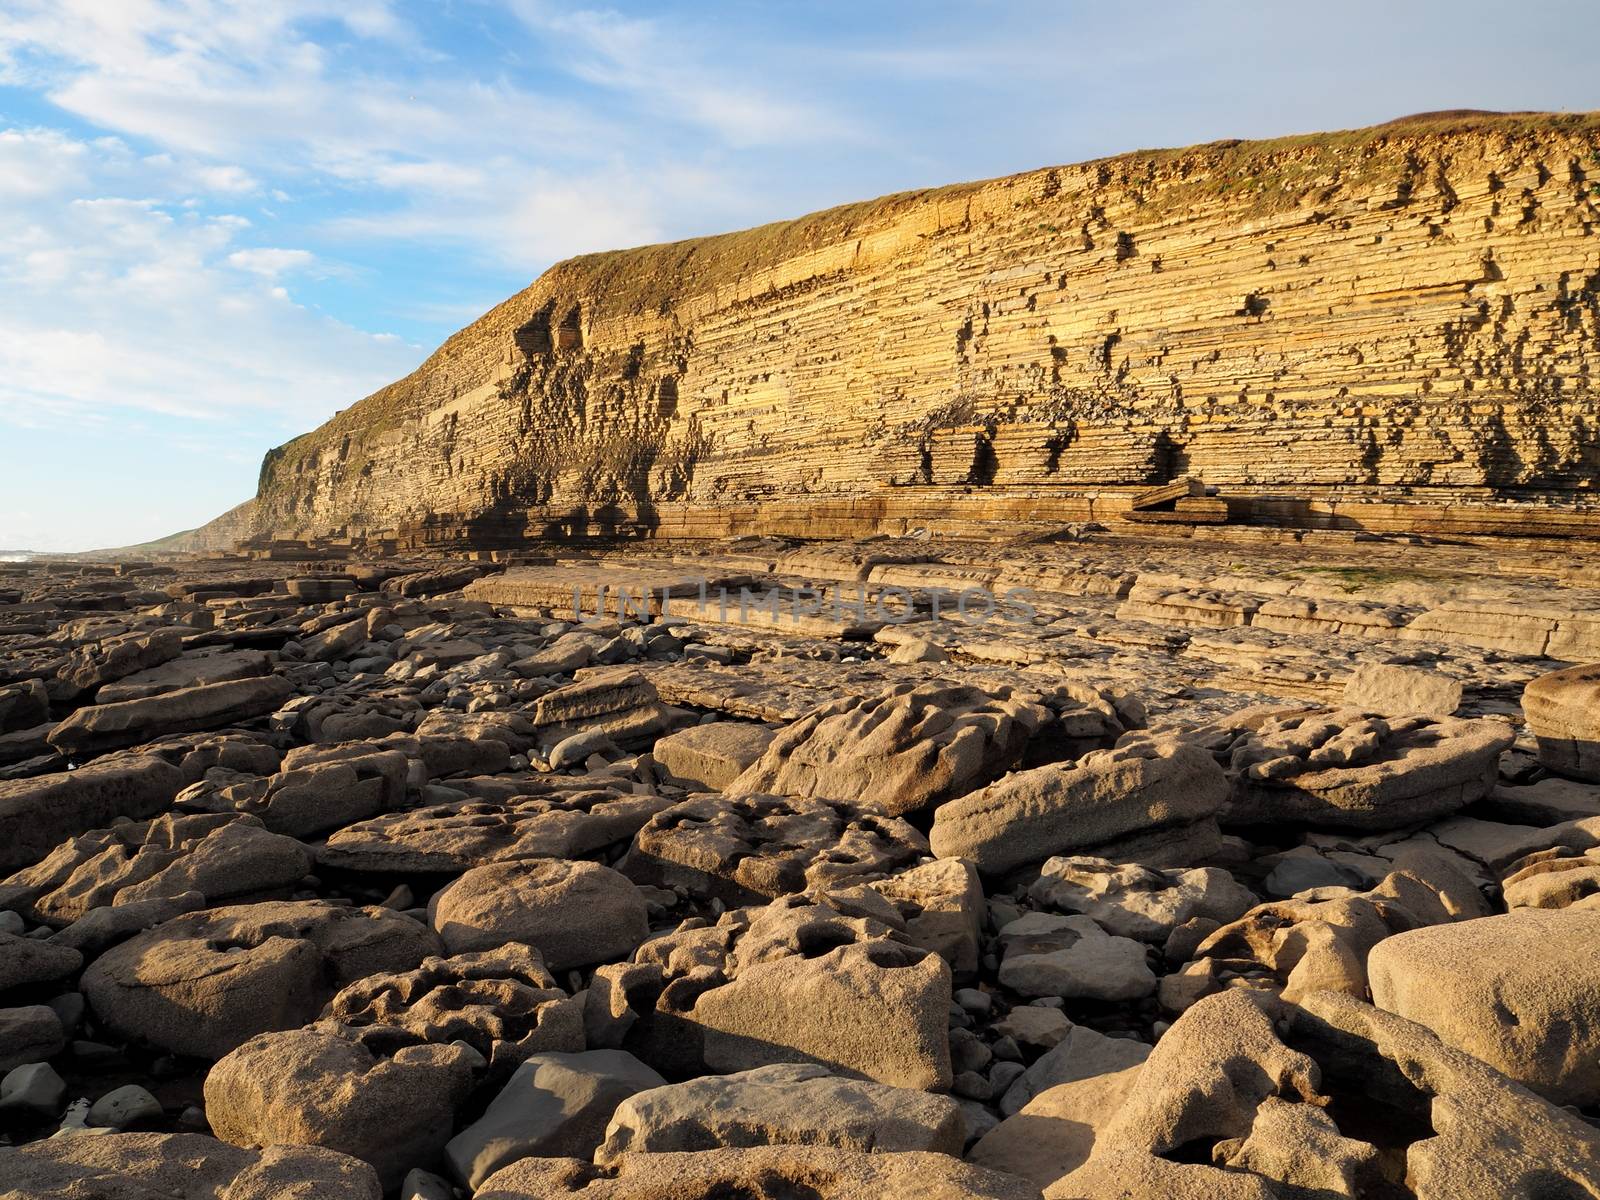 Carboniferous layers of limestone and shale cliffs at Dunraven Bay, Vale of Glamorgan, South Wales which was also used in the Doctor Who TV Series as Bad Wolf Bay